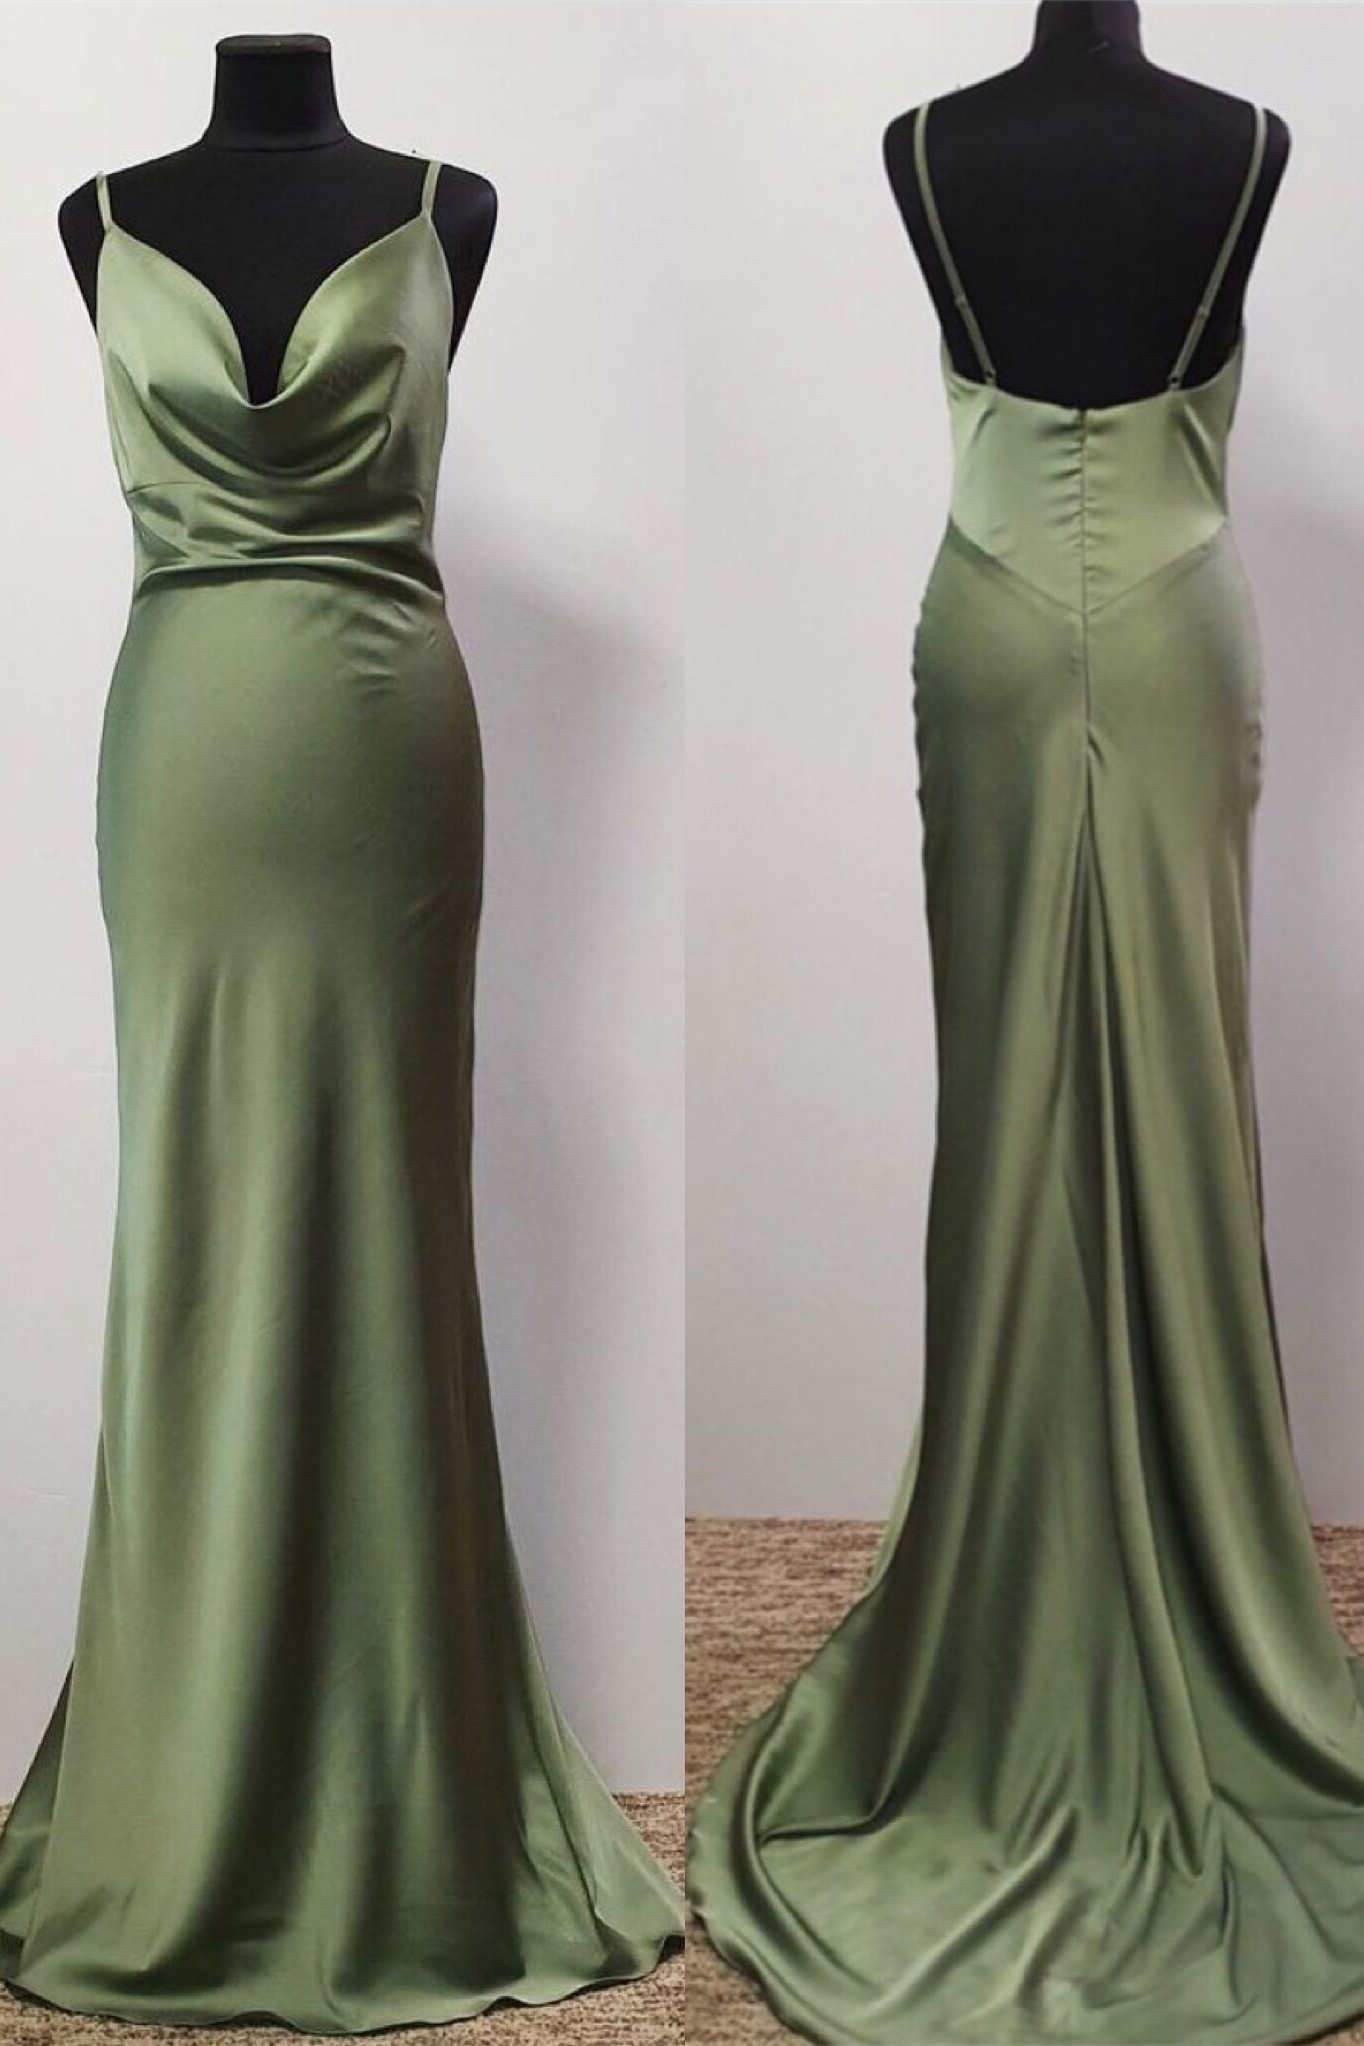 Oliver Green Cowl Neck Trumpet Long Corset Prom Dress,Sheath Gala Dresses outfit, Country Wedding Dress